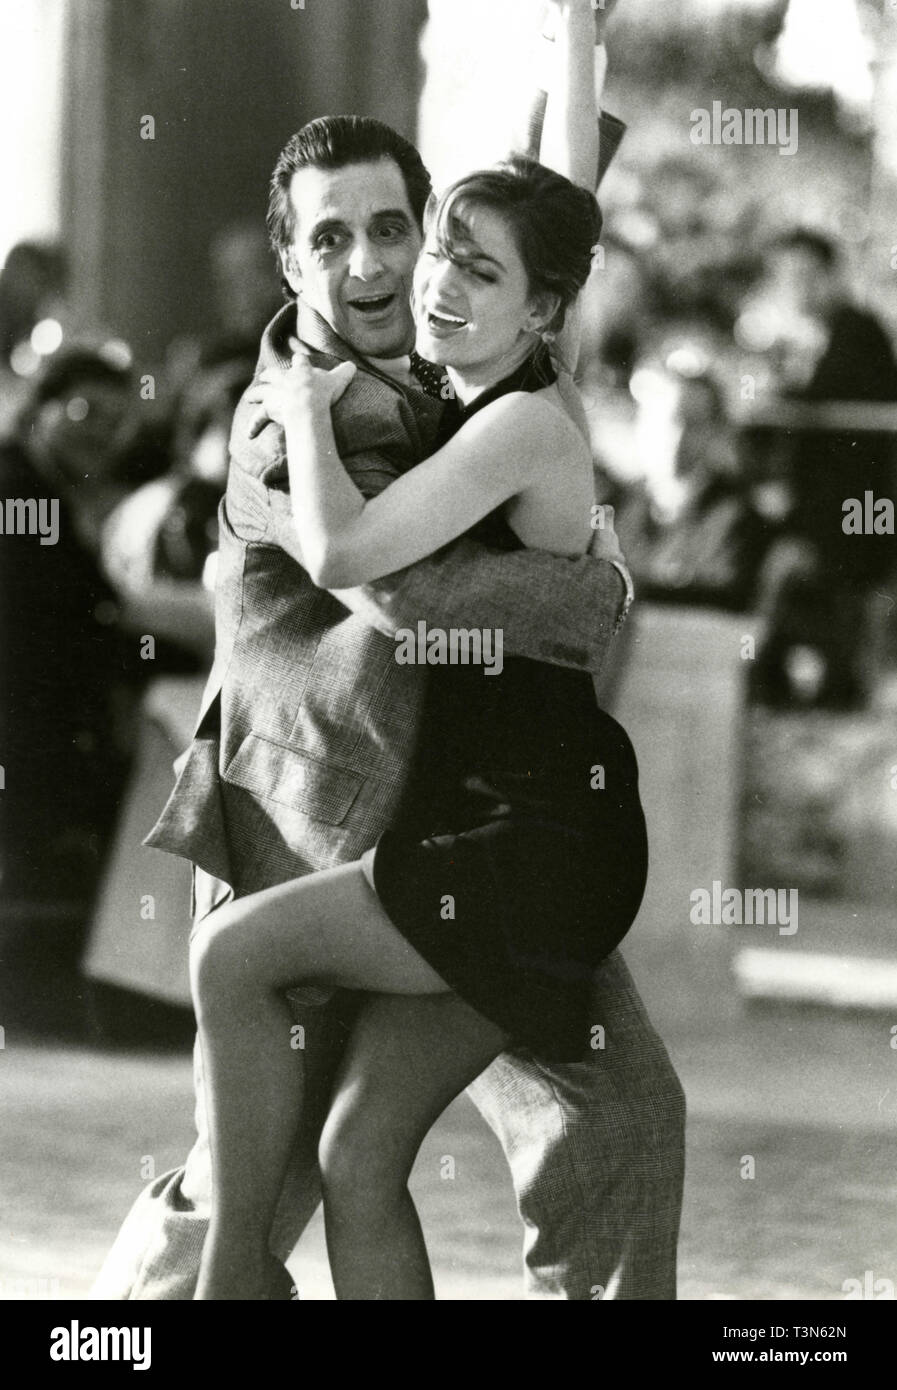 Actors Al Pacino and Gabrielle Anwar in the movie Scent of a Woman, 1992 Stock Photo